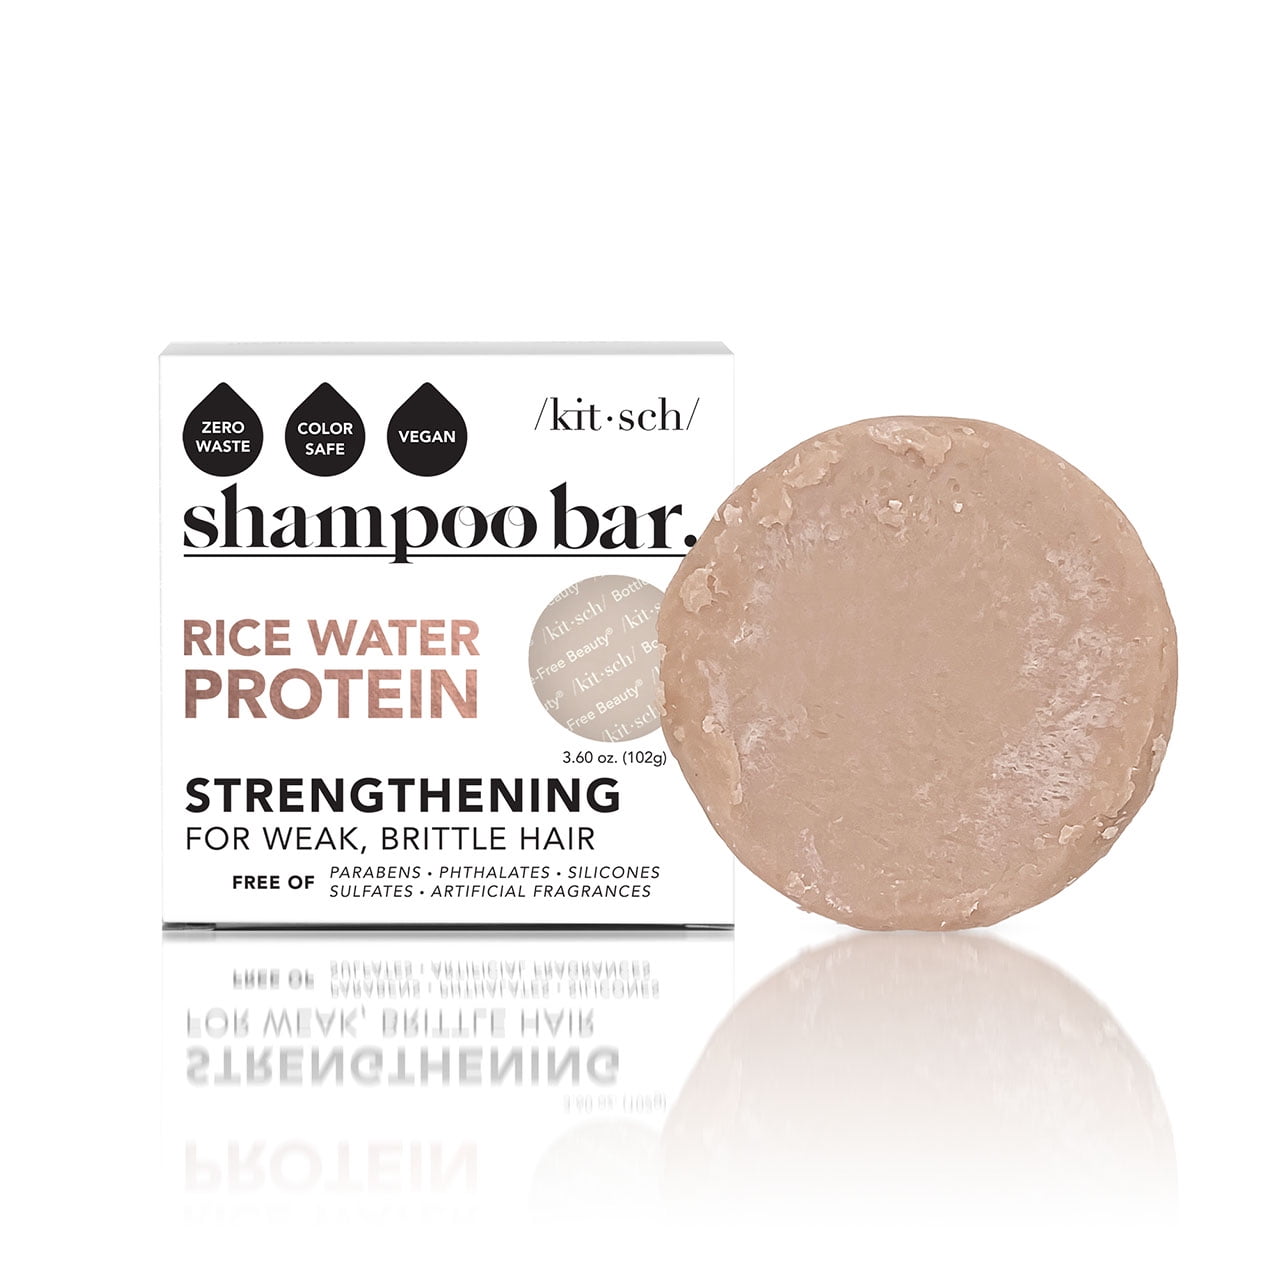 Kitsch Strengthening 2 in 1 Shampoo and Bar with Rice Water Protein, 3.6 oz - Walmart.com